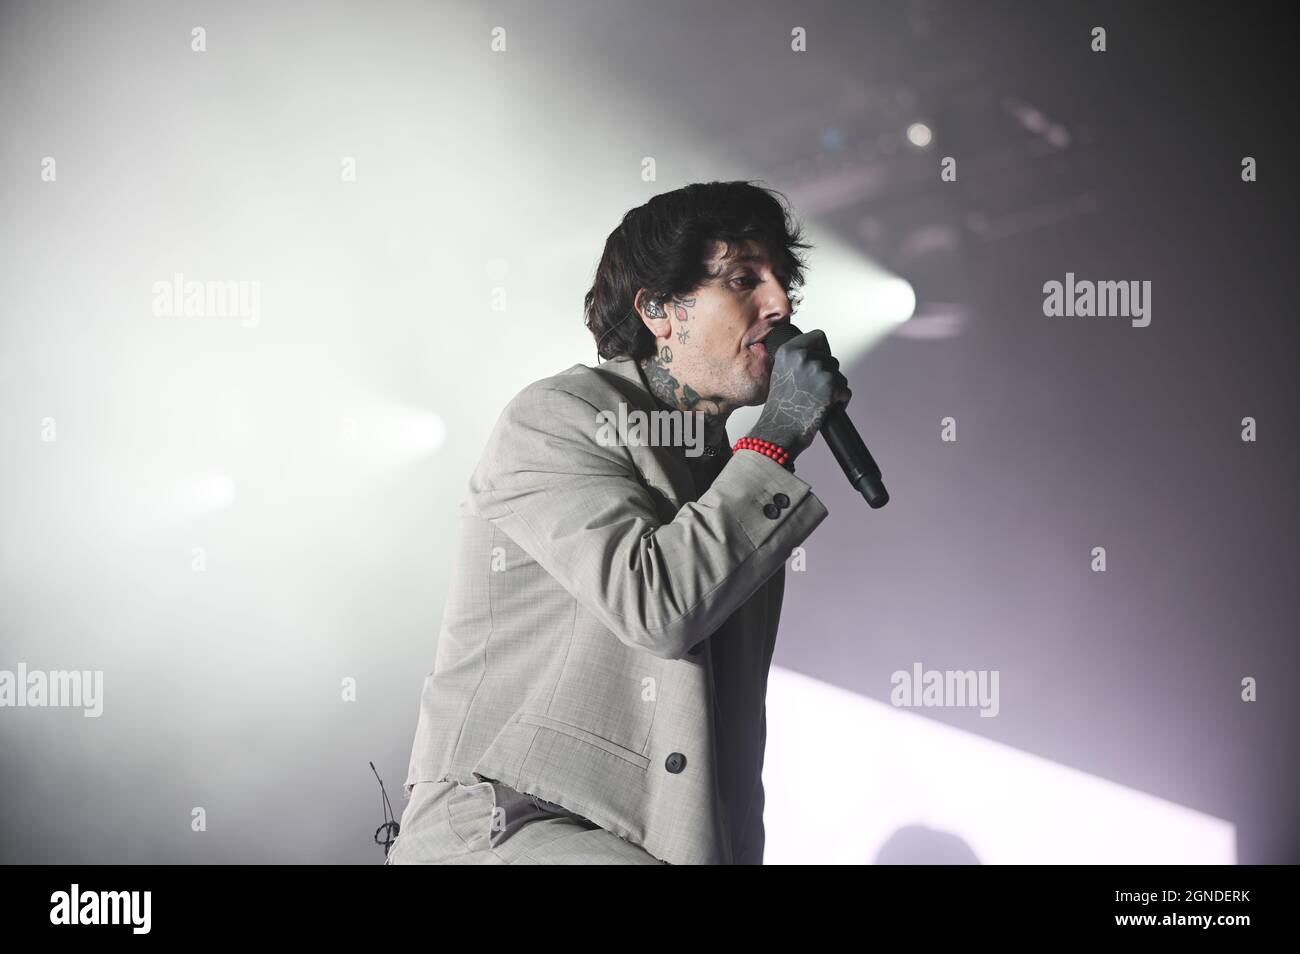 Somerset, Wisconsin, USA. 15th May, 2016. Singer OLIVER SYKES of Bring Me  the Horizon performs live at Somerset Amphitheater during the Northern  Invasion Music Festival in Somerset, Wisconsin © Daniel DeSlover/ZUMA  Wire/Alamy